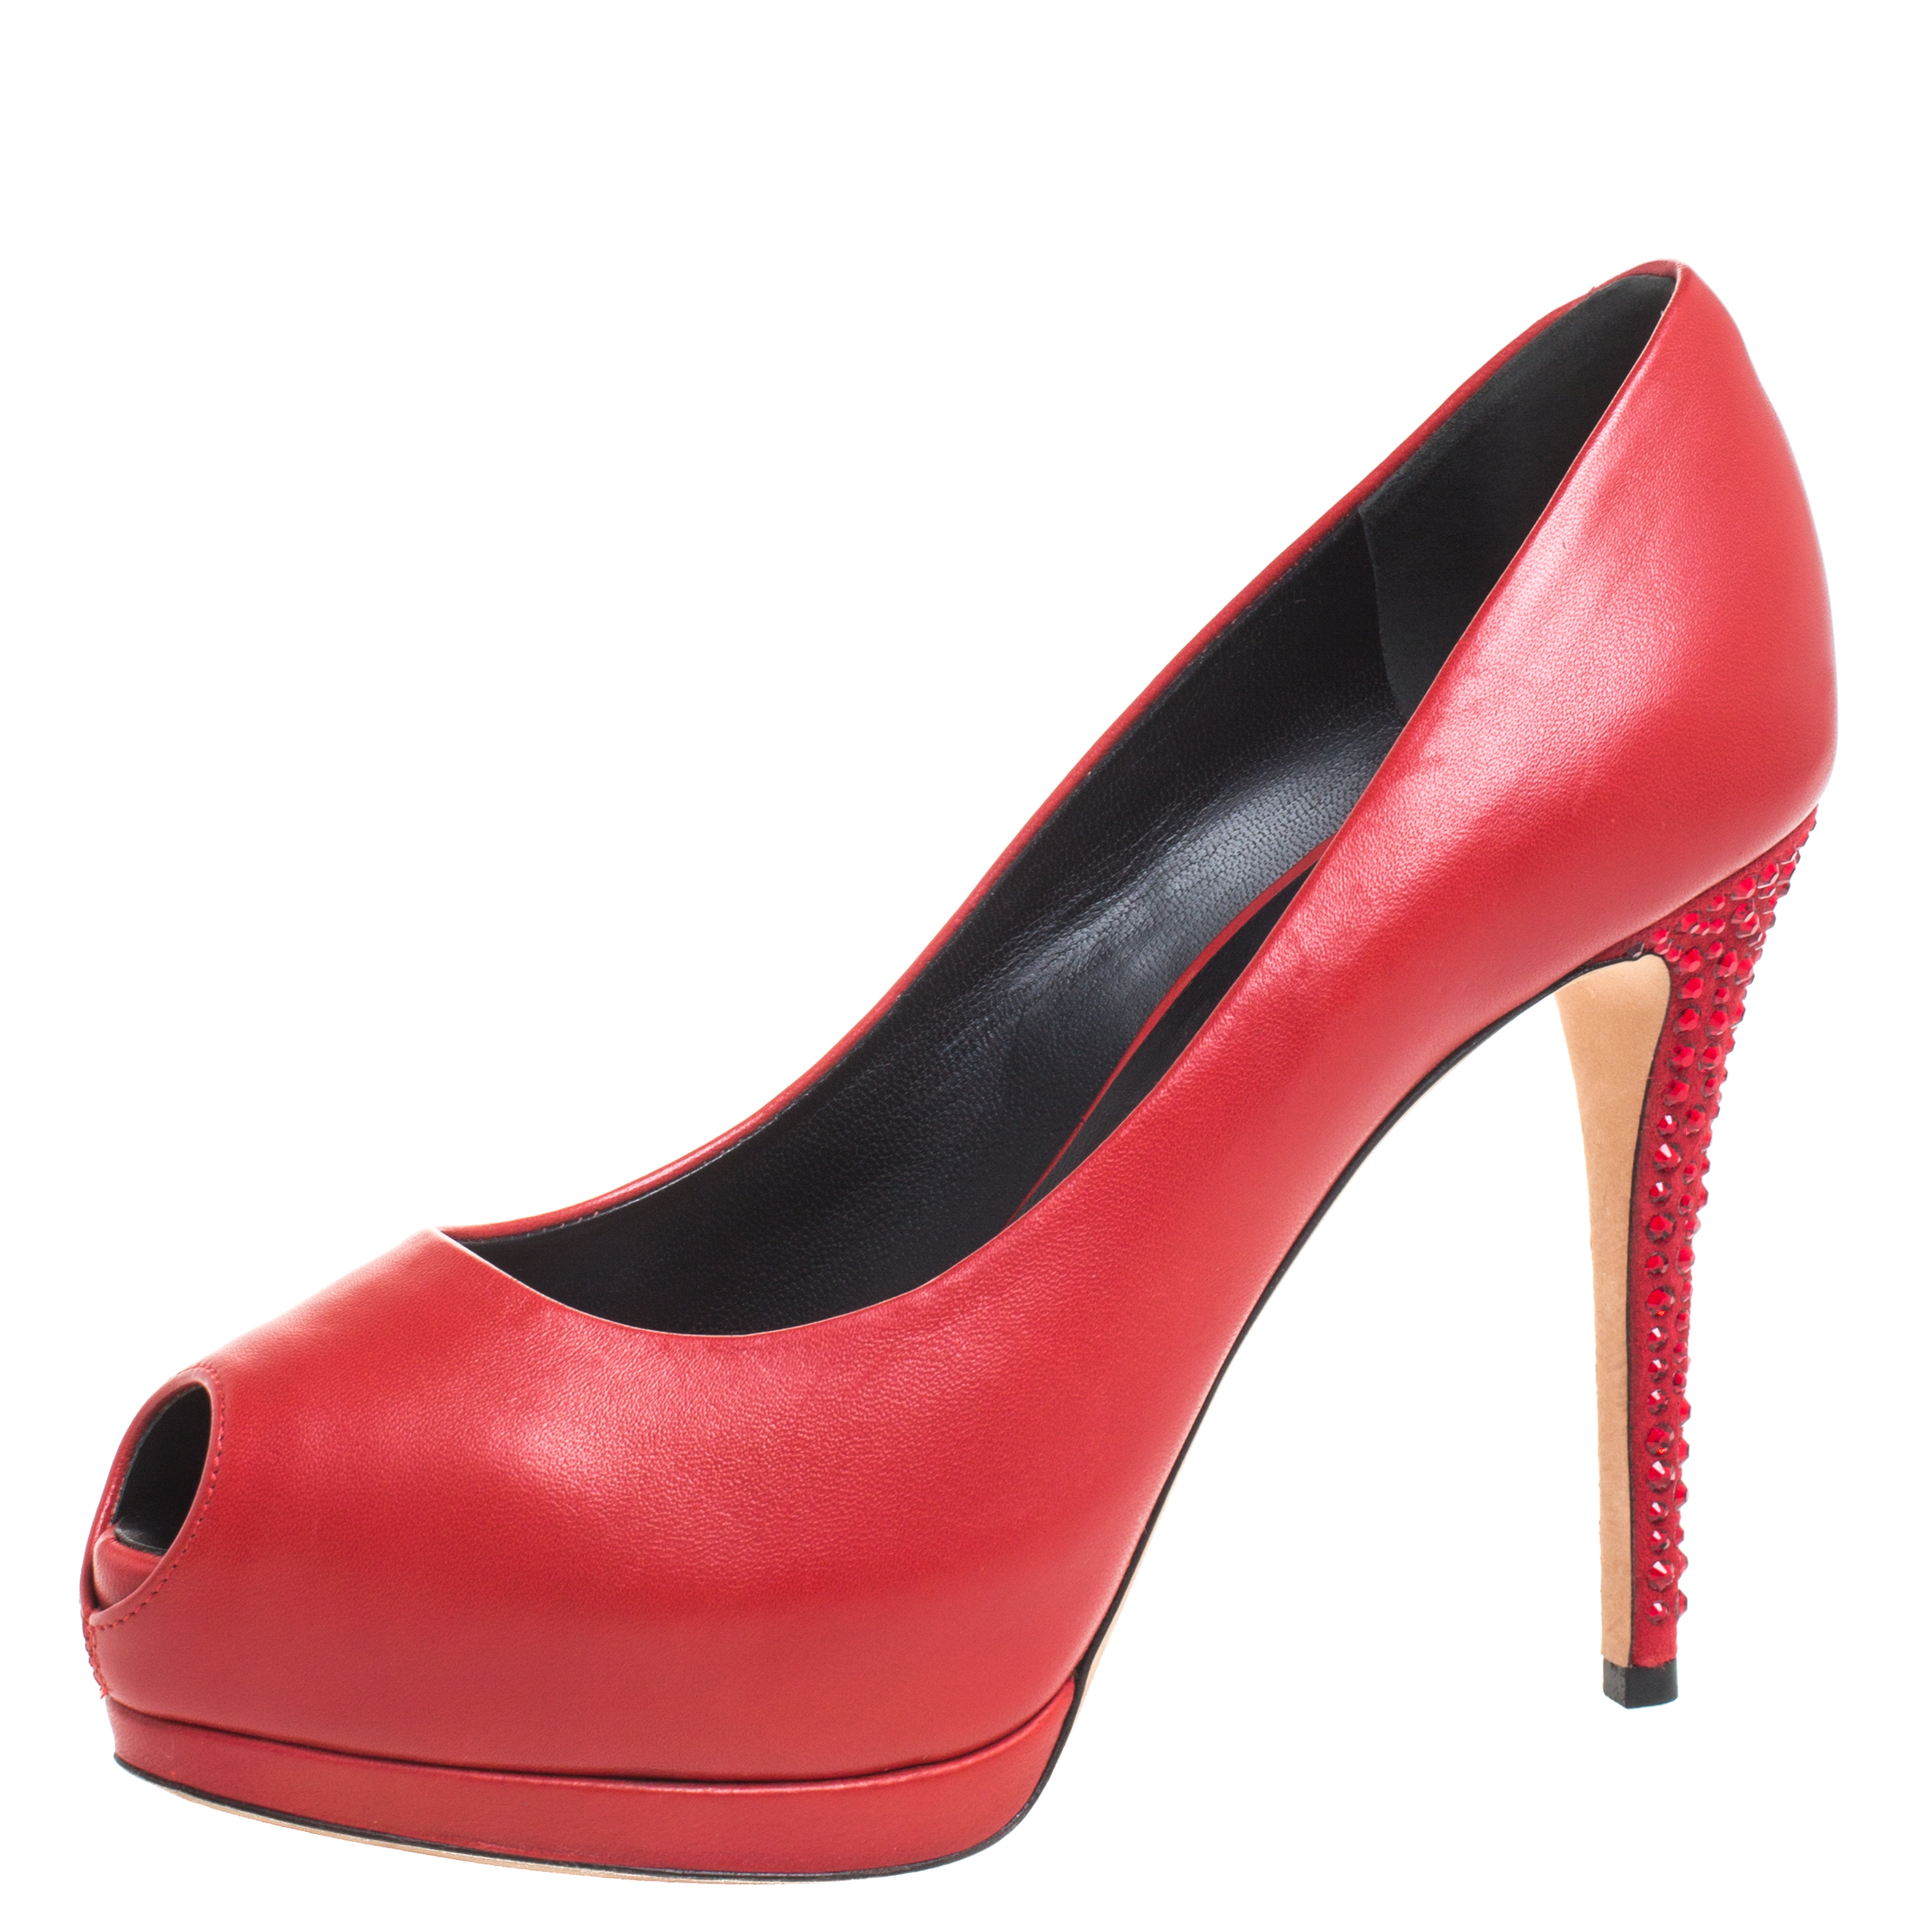 

Giuseppe Zanotti Red Leather And Suede Crystal Embellished Peep Toe Platform Pumps Size